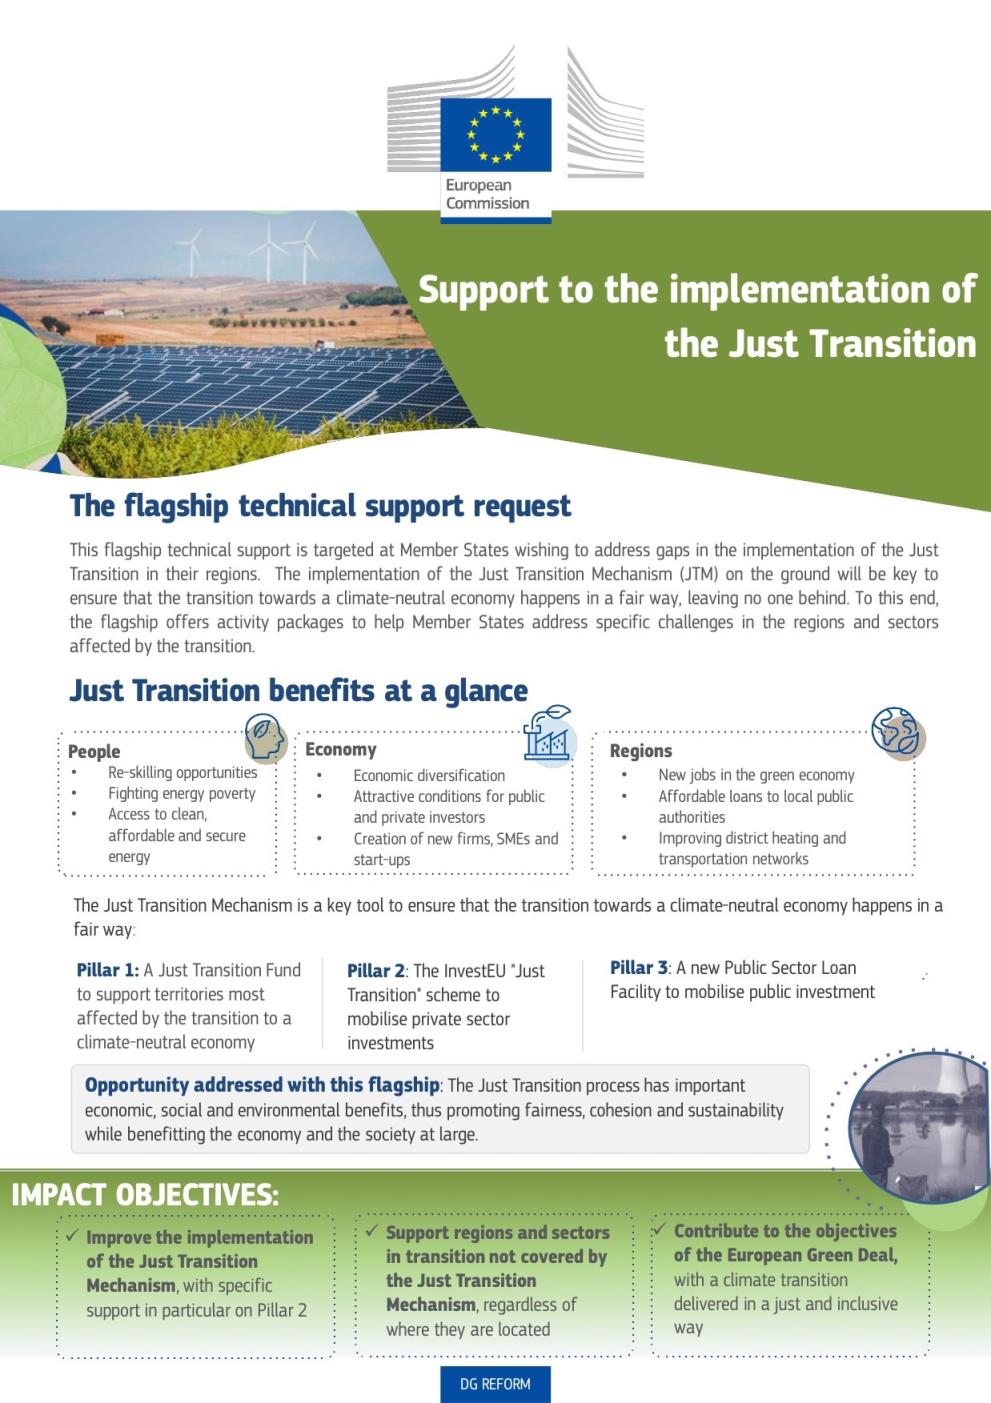 Support to the Implementation of the Just Transition